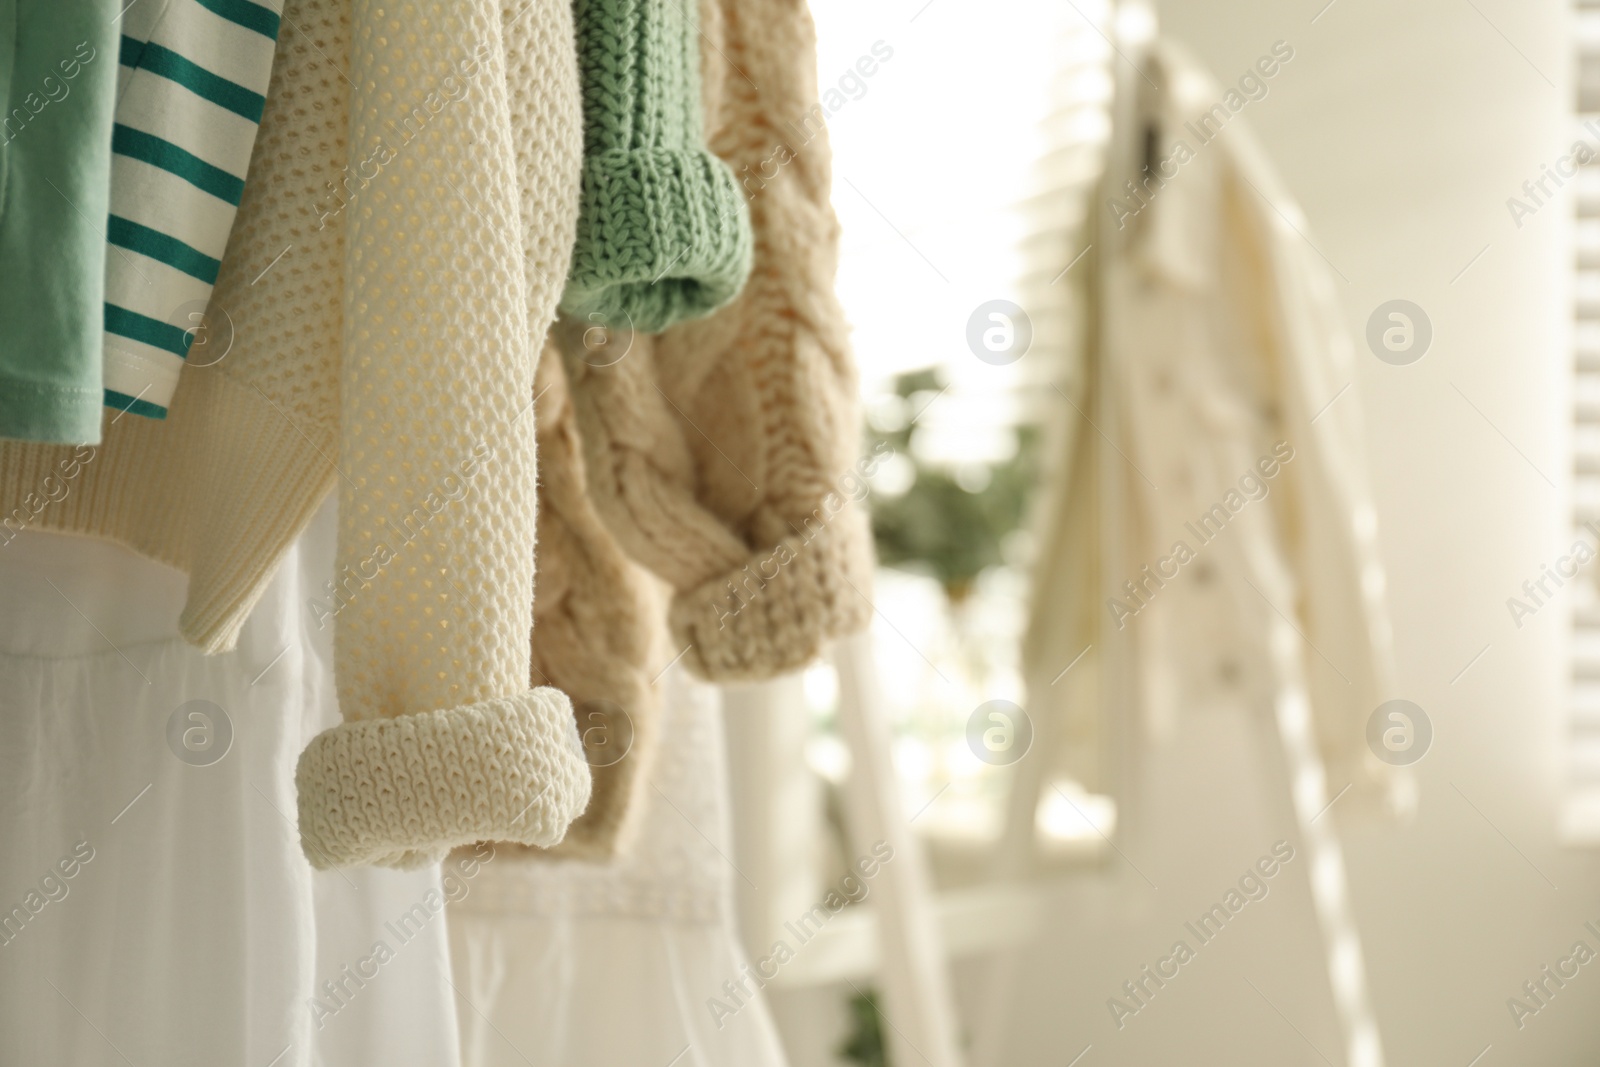 Photo of Rack with stylish women's clothes indoors, space for text. Interior design